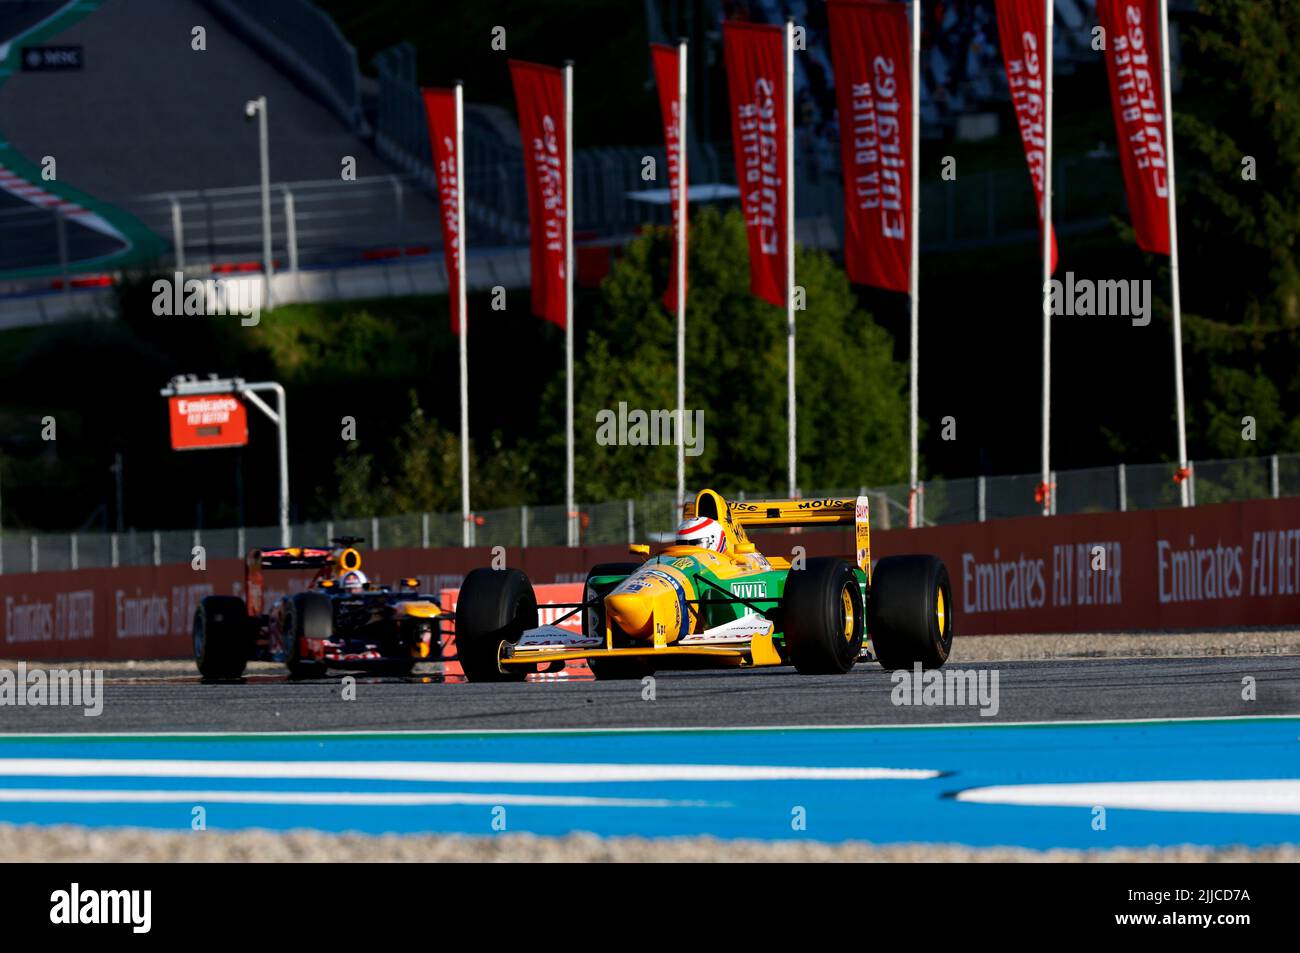 Spielberg, Austria. 9th July, 2022. Martin Brundle (GBR) drives Benetton B192, F1 Grand Prix of Austria at Red Bull Ring on July 9, 2022 in Spielberg, Austria. (Photo by HIGH TWO) Credit: dpa/Alamy Live News Stock Photo